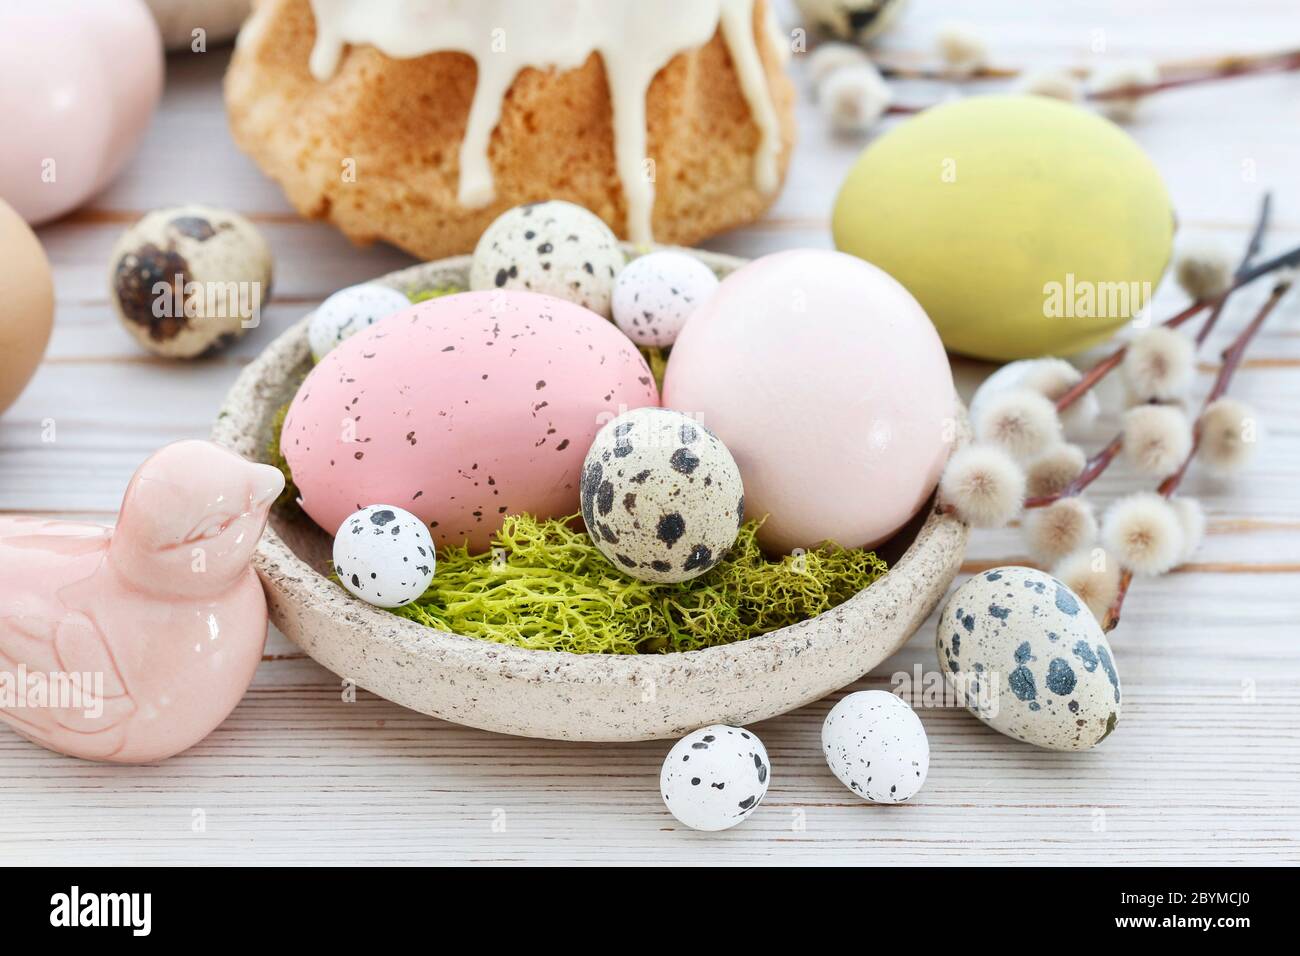 Easter table with cakes, eggs and catkins. Festive decor Stock Photo